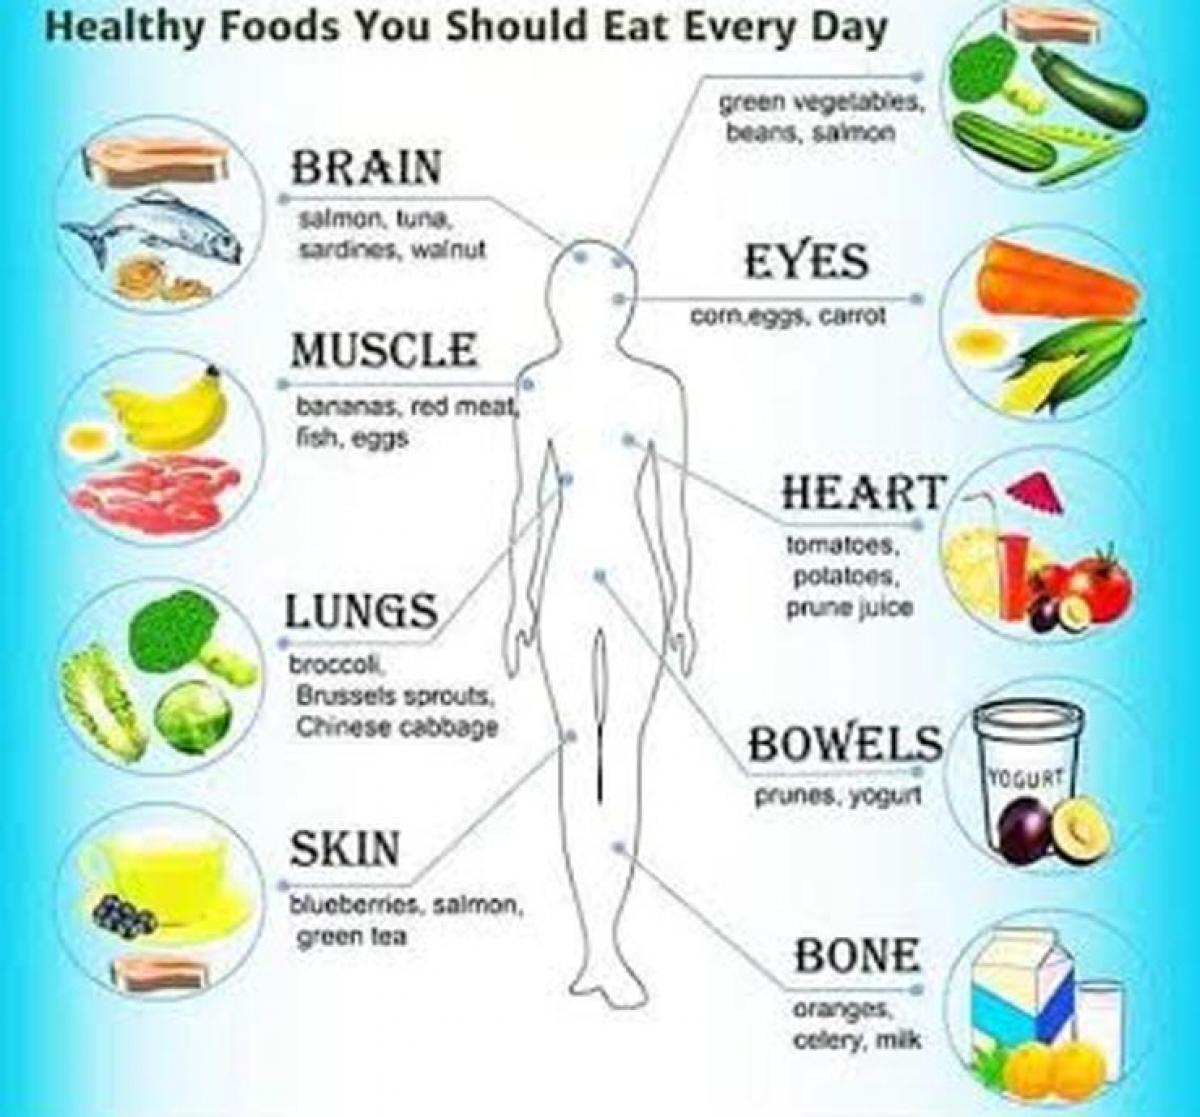 Healthy foods you should eat everyday